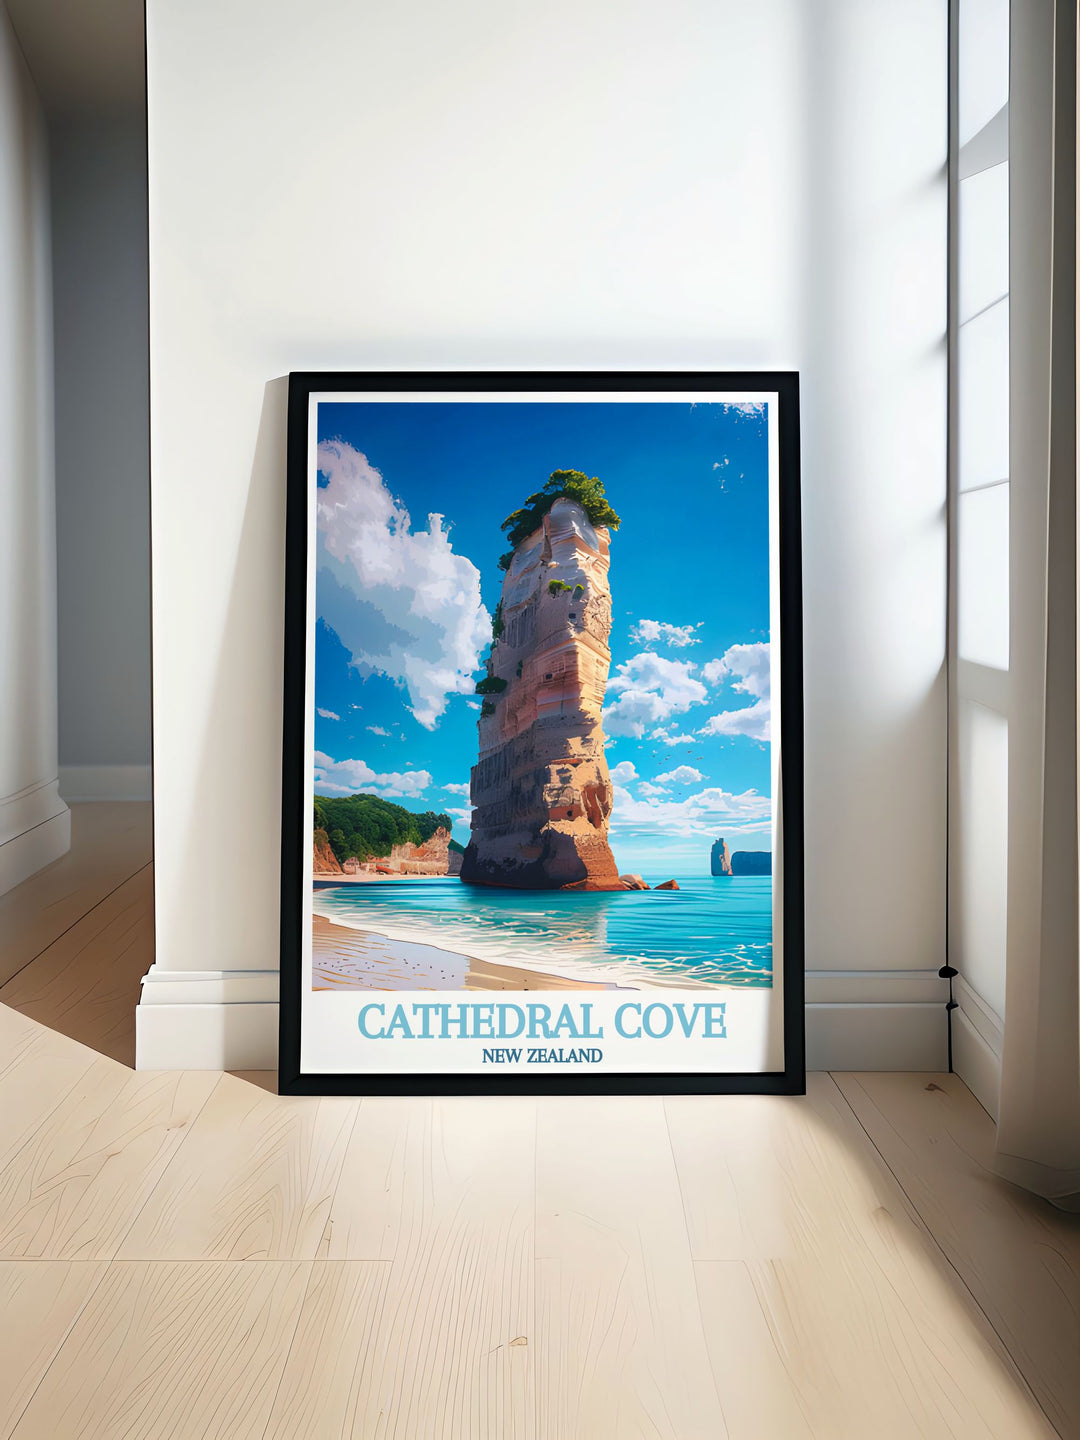 The natural beauty of Cathedral Cove is enhanced by its surrounding cliffs and lush greenery, creating a tranquil and enchanting atmosphere.